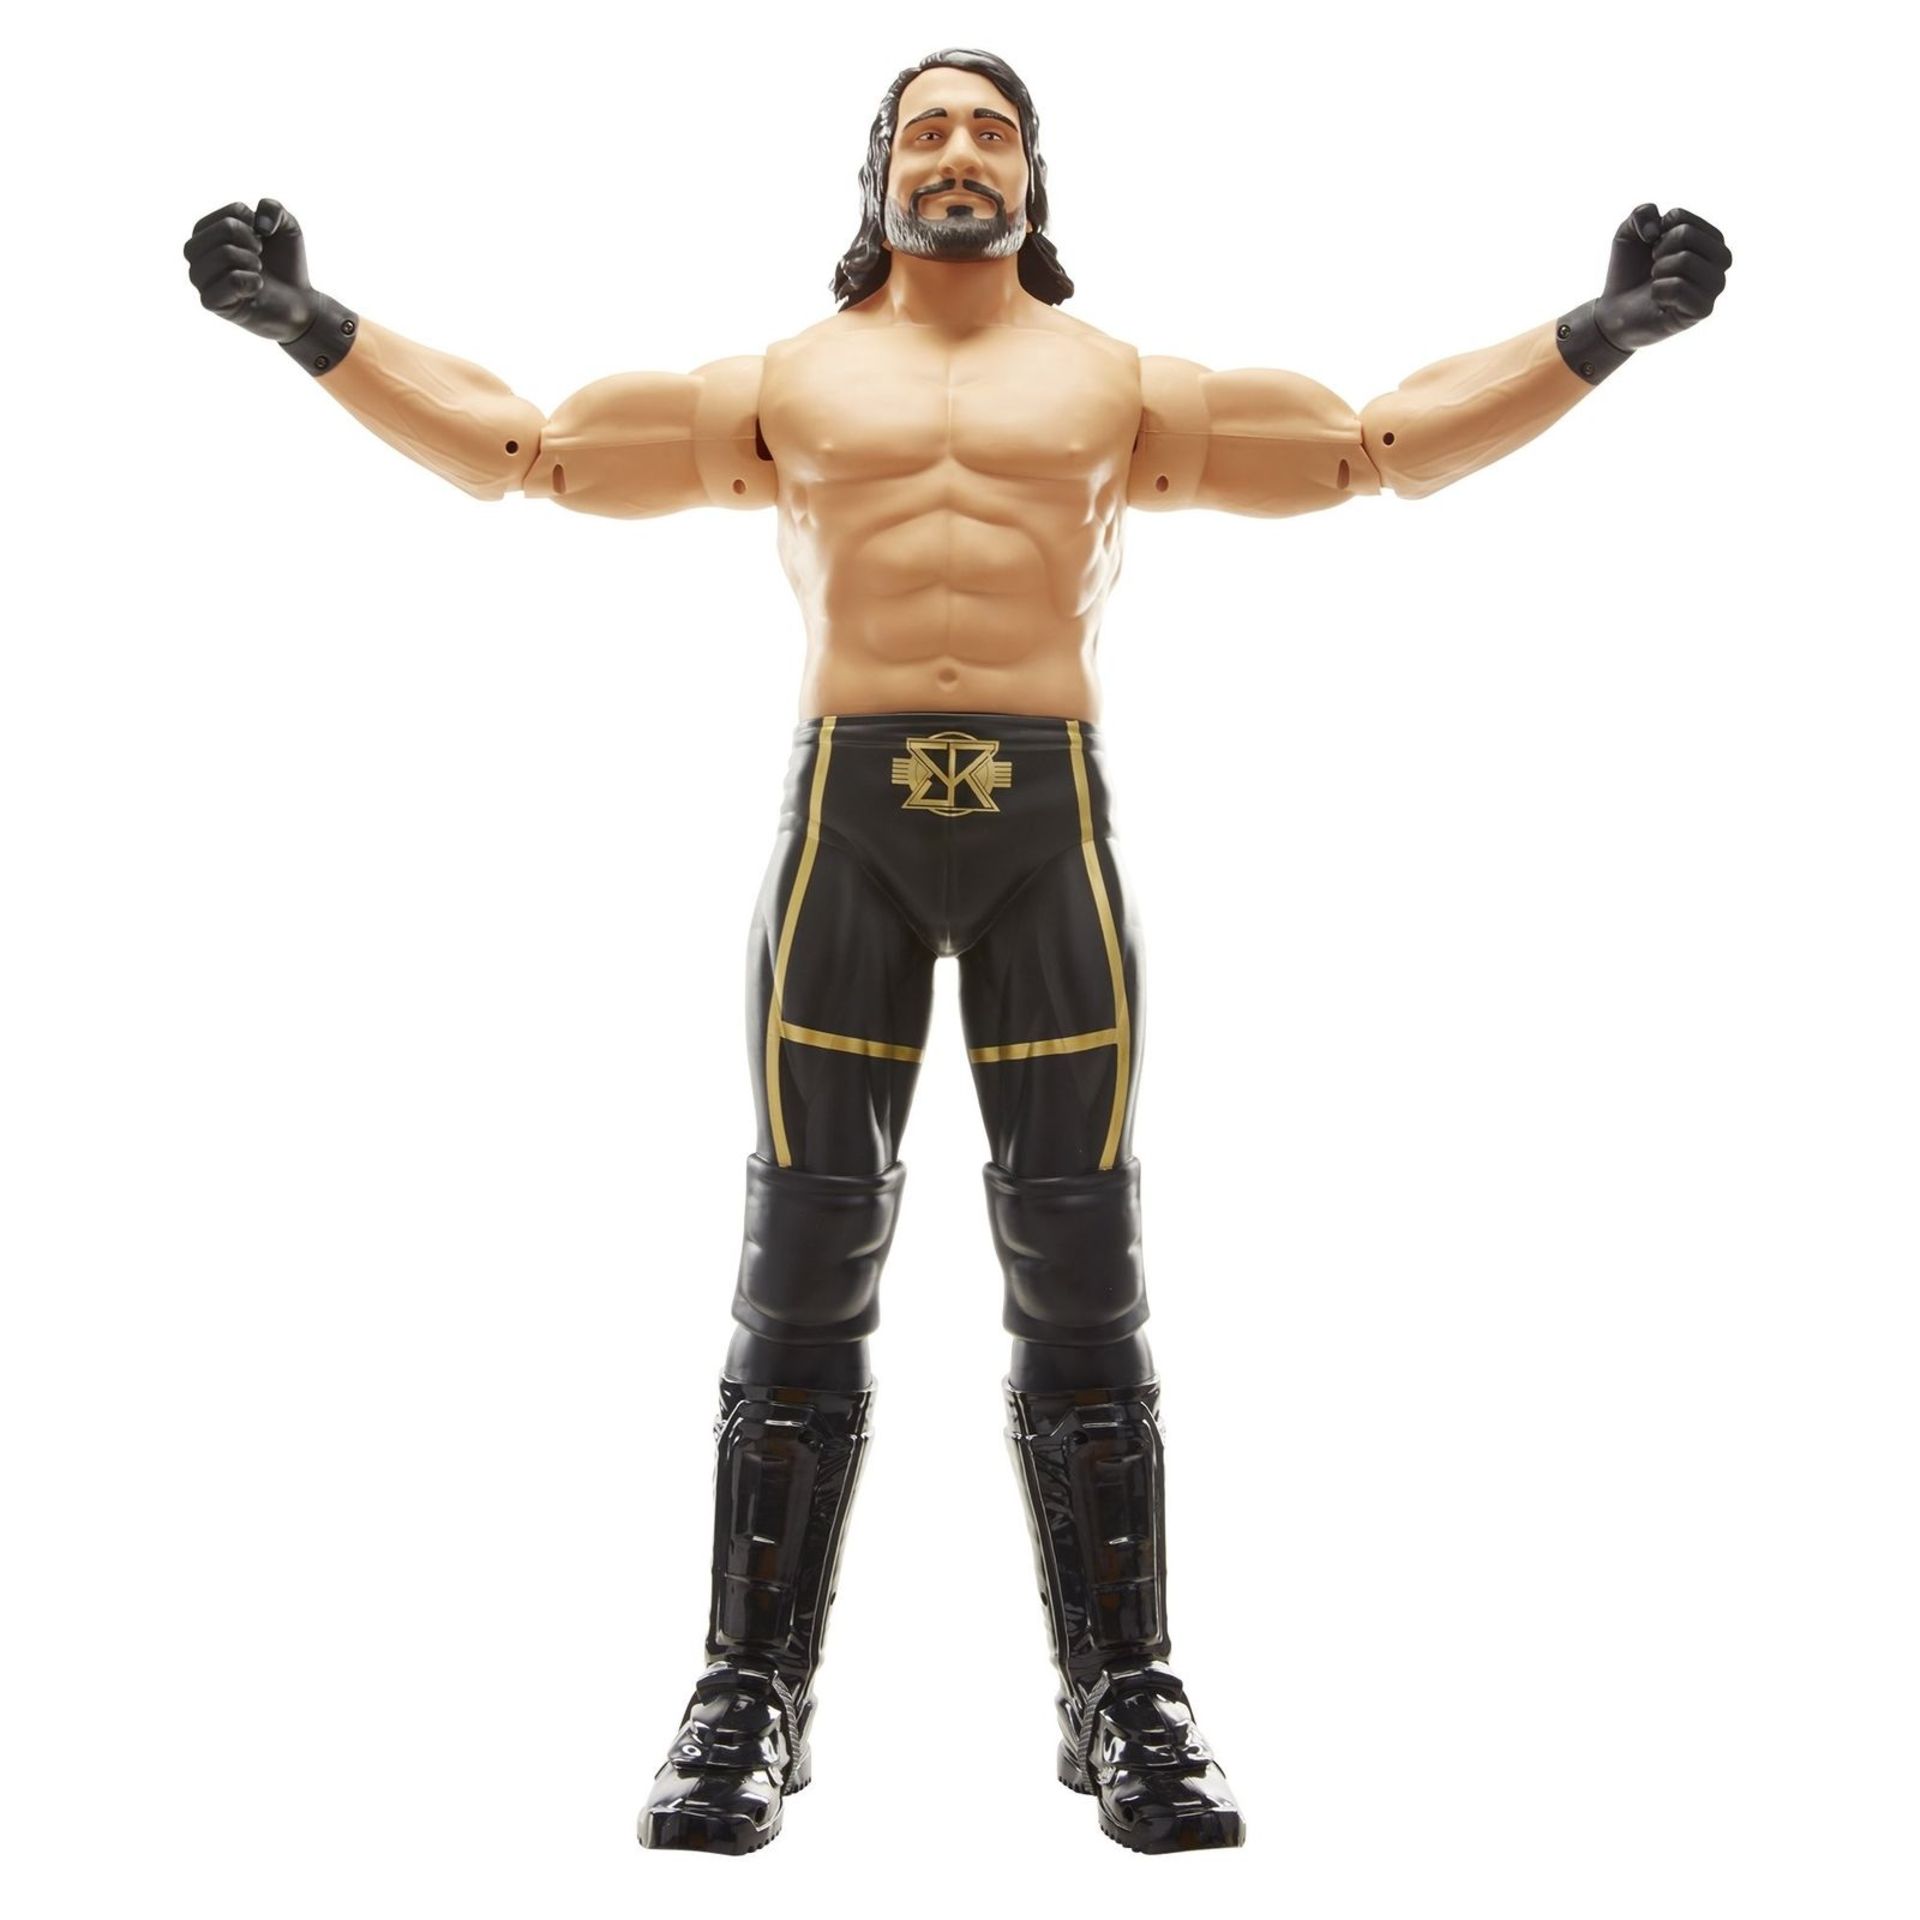 V Brand New Massive 31" WWE Seth Rollins Action Figure - TalsonMarket Price £29.00 - 8 Points of - Image 4 of 5